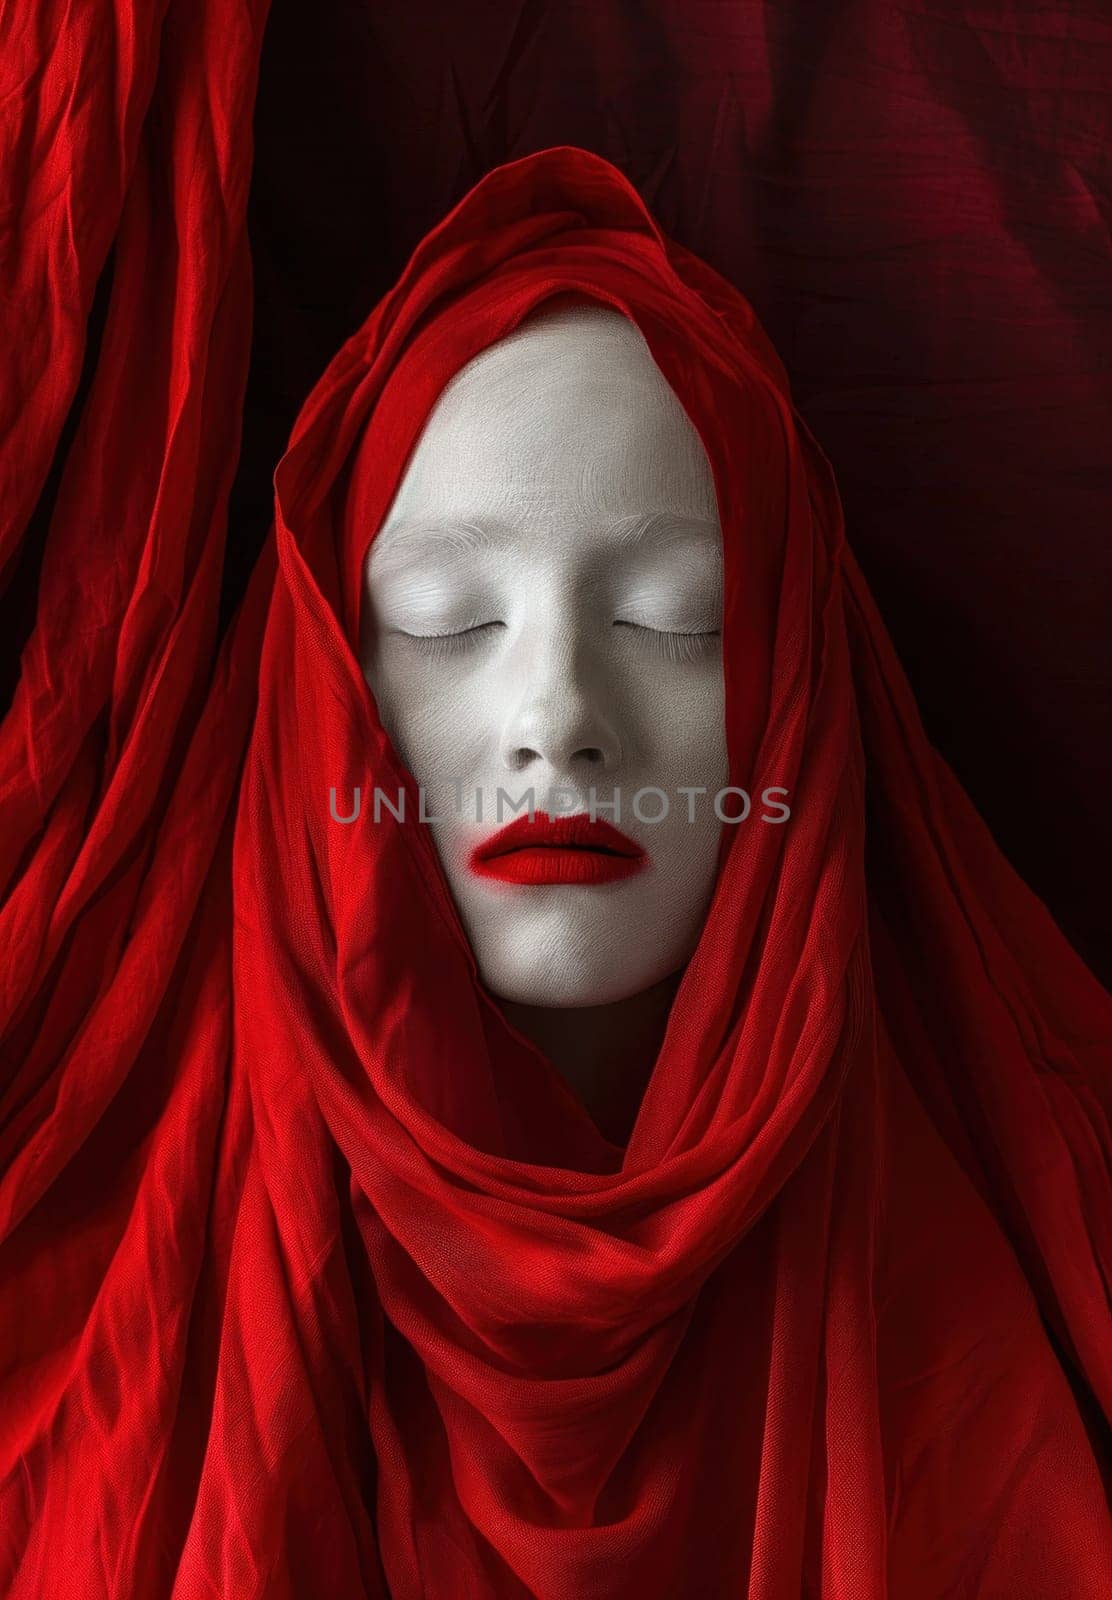 Beauty concept woman with red scarf and white makeup laying on cloth in artistic fashion pose by Vichizh